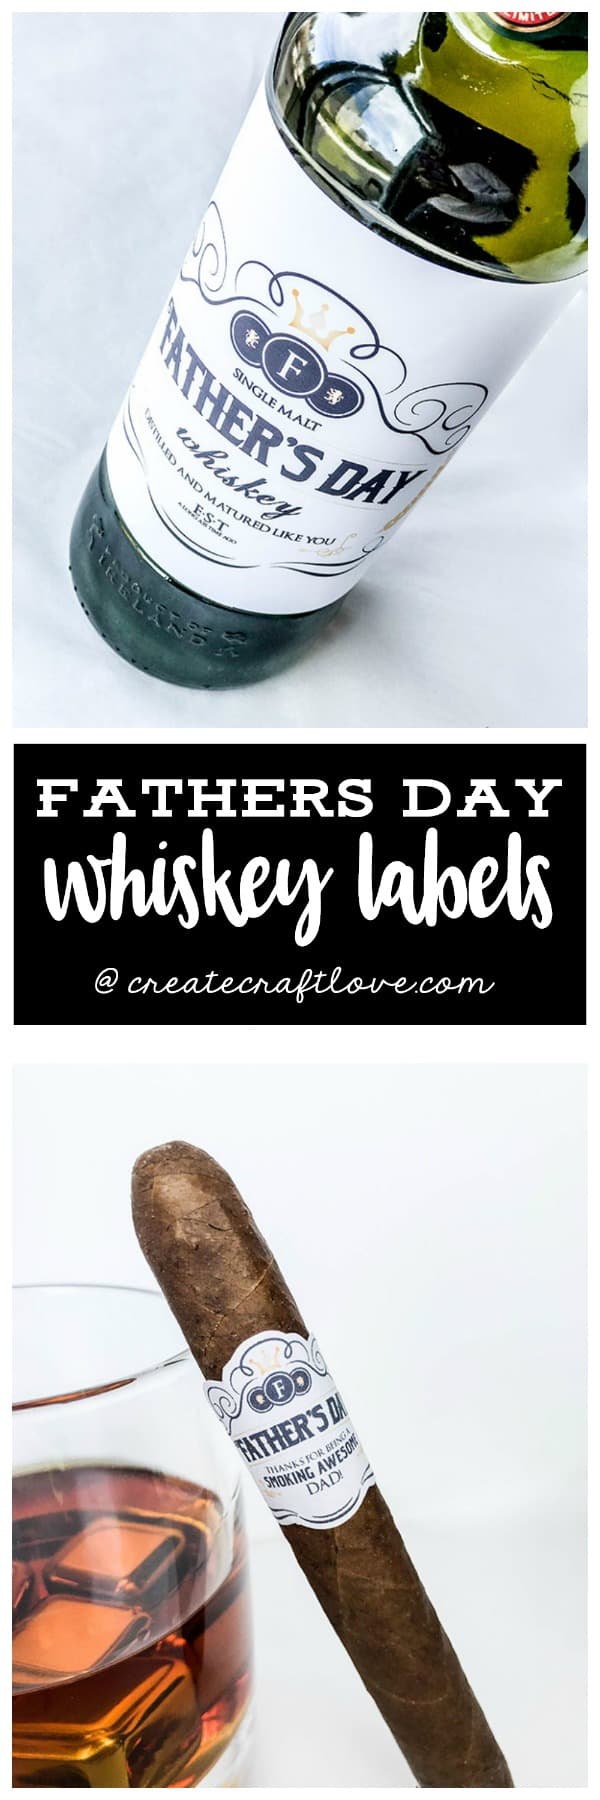 urprise the whiskey lover in your life this Fathers Day with our custom Whiskey Labels!